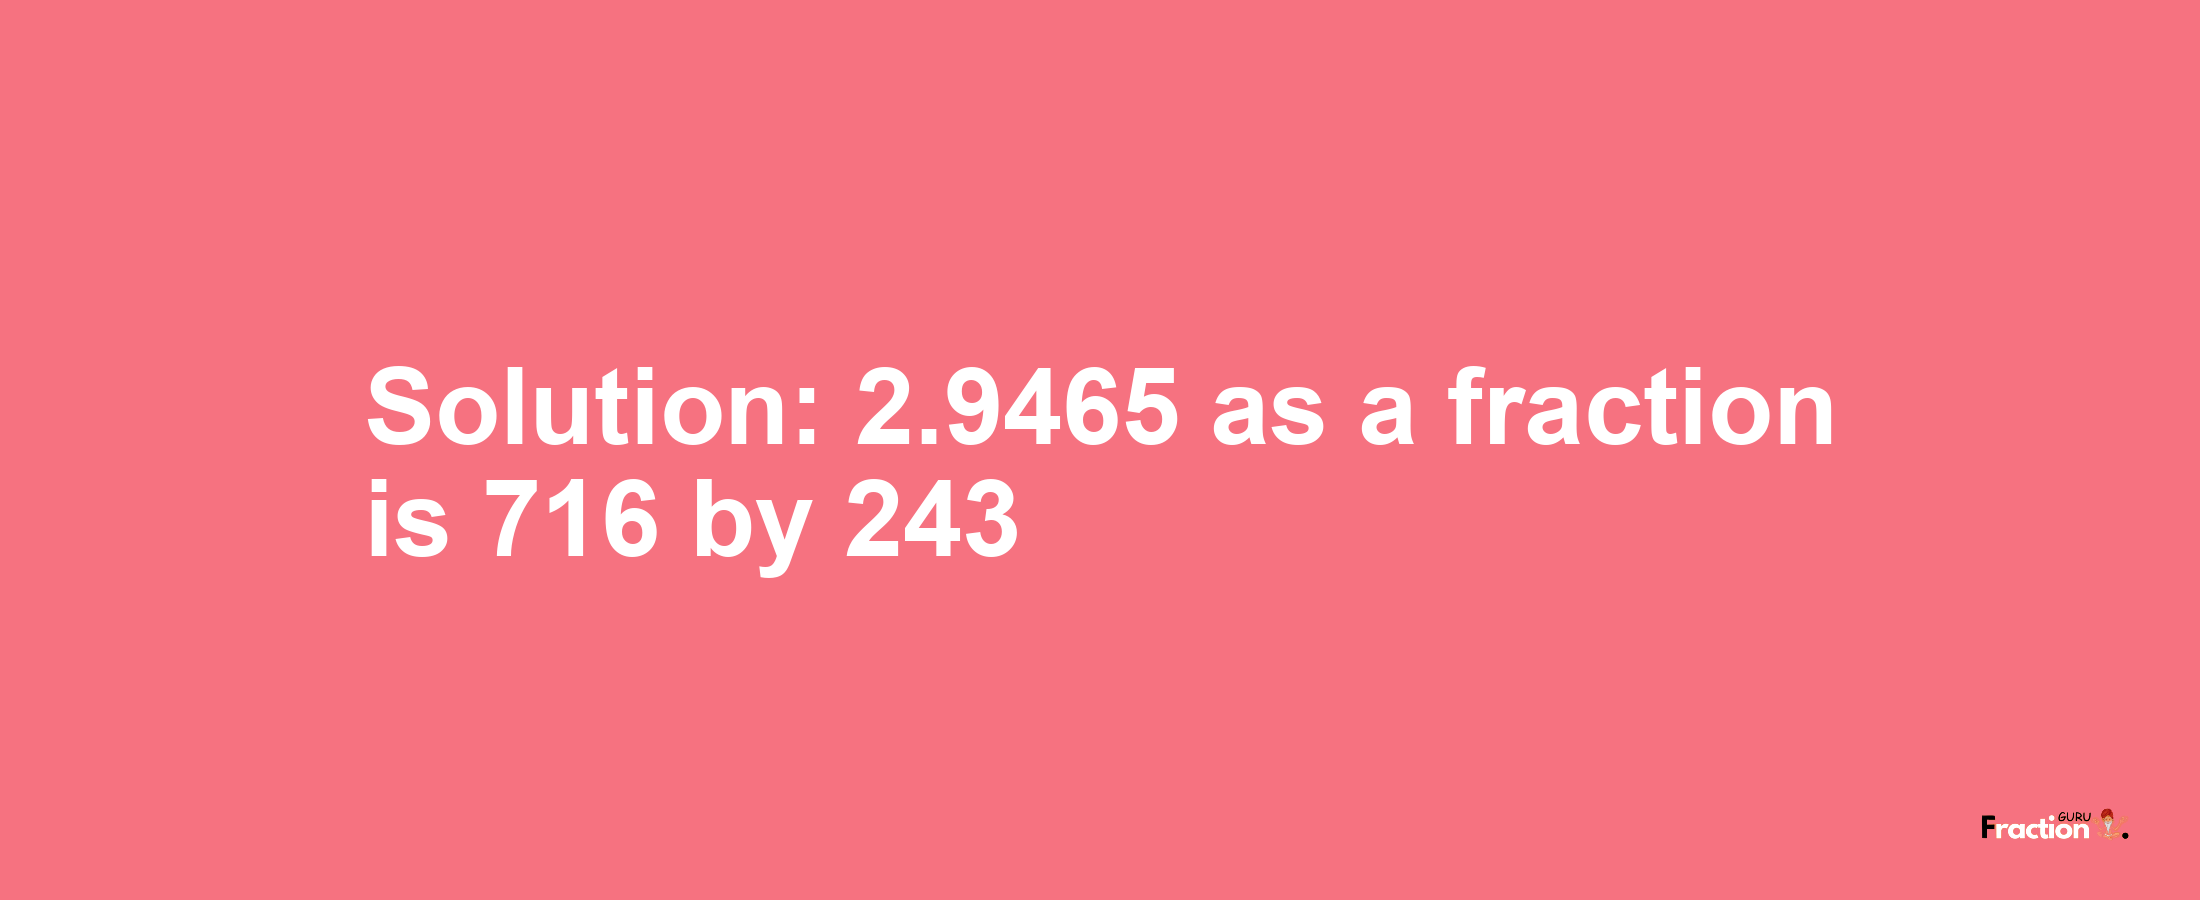 Solution:2.9465 as a fraction is 716/243